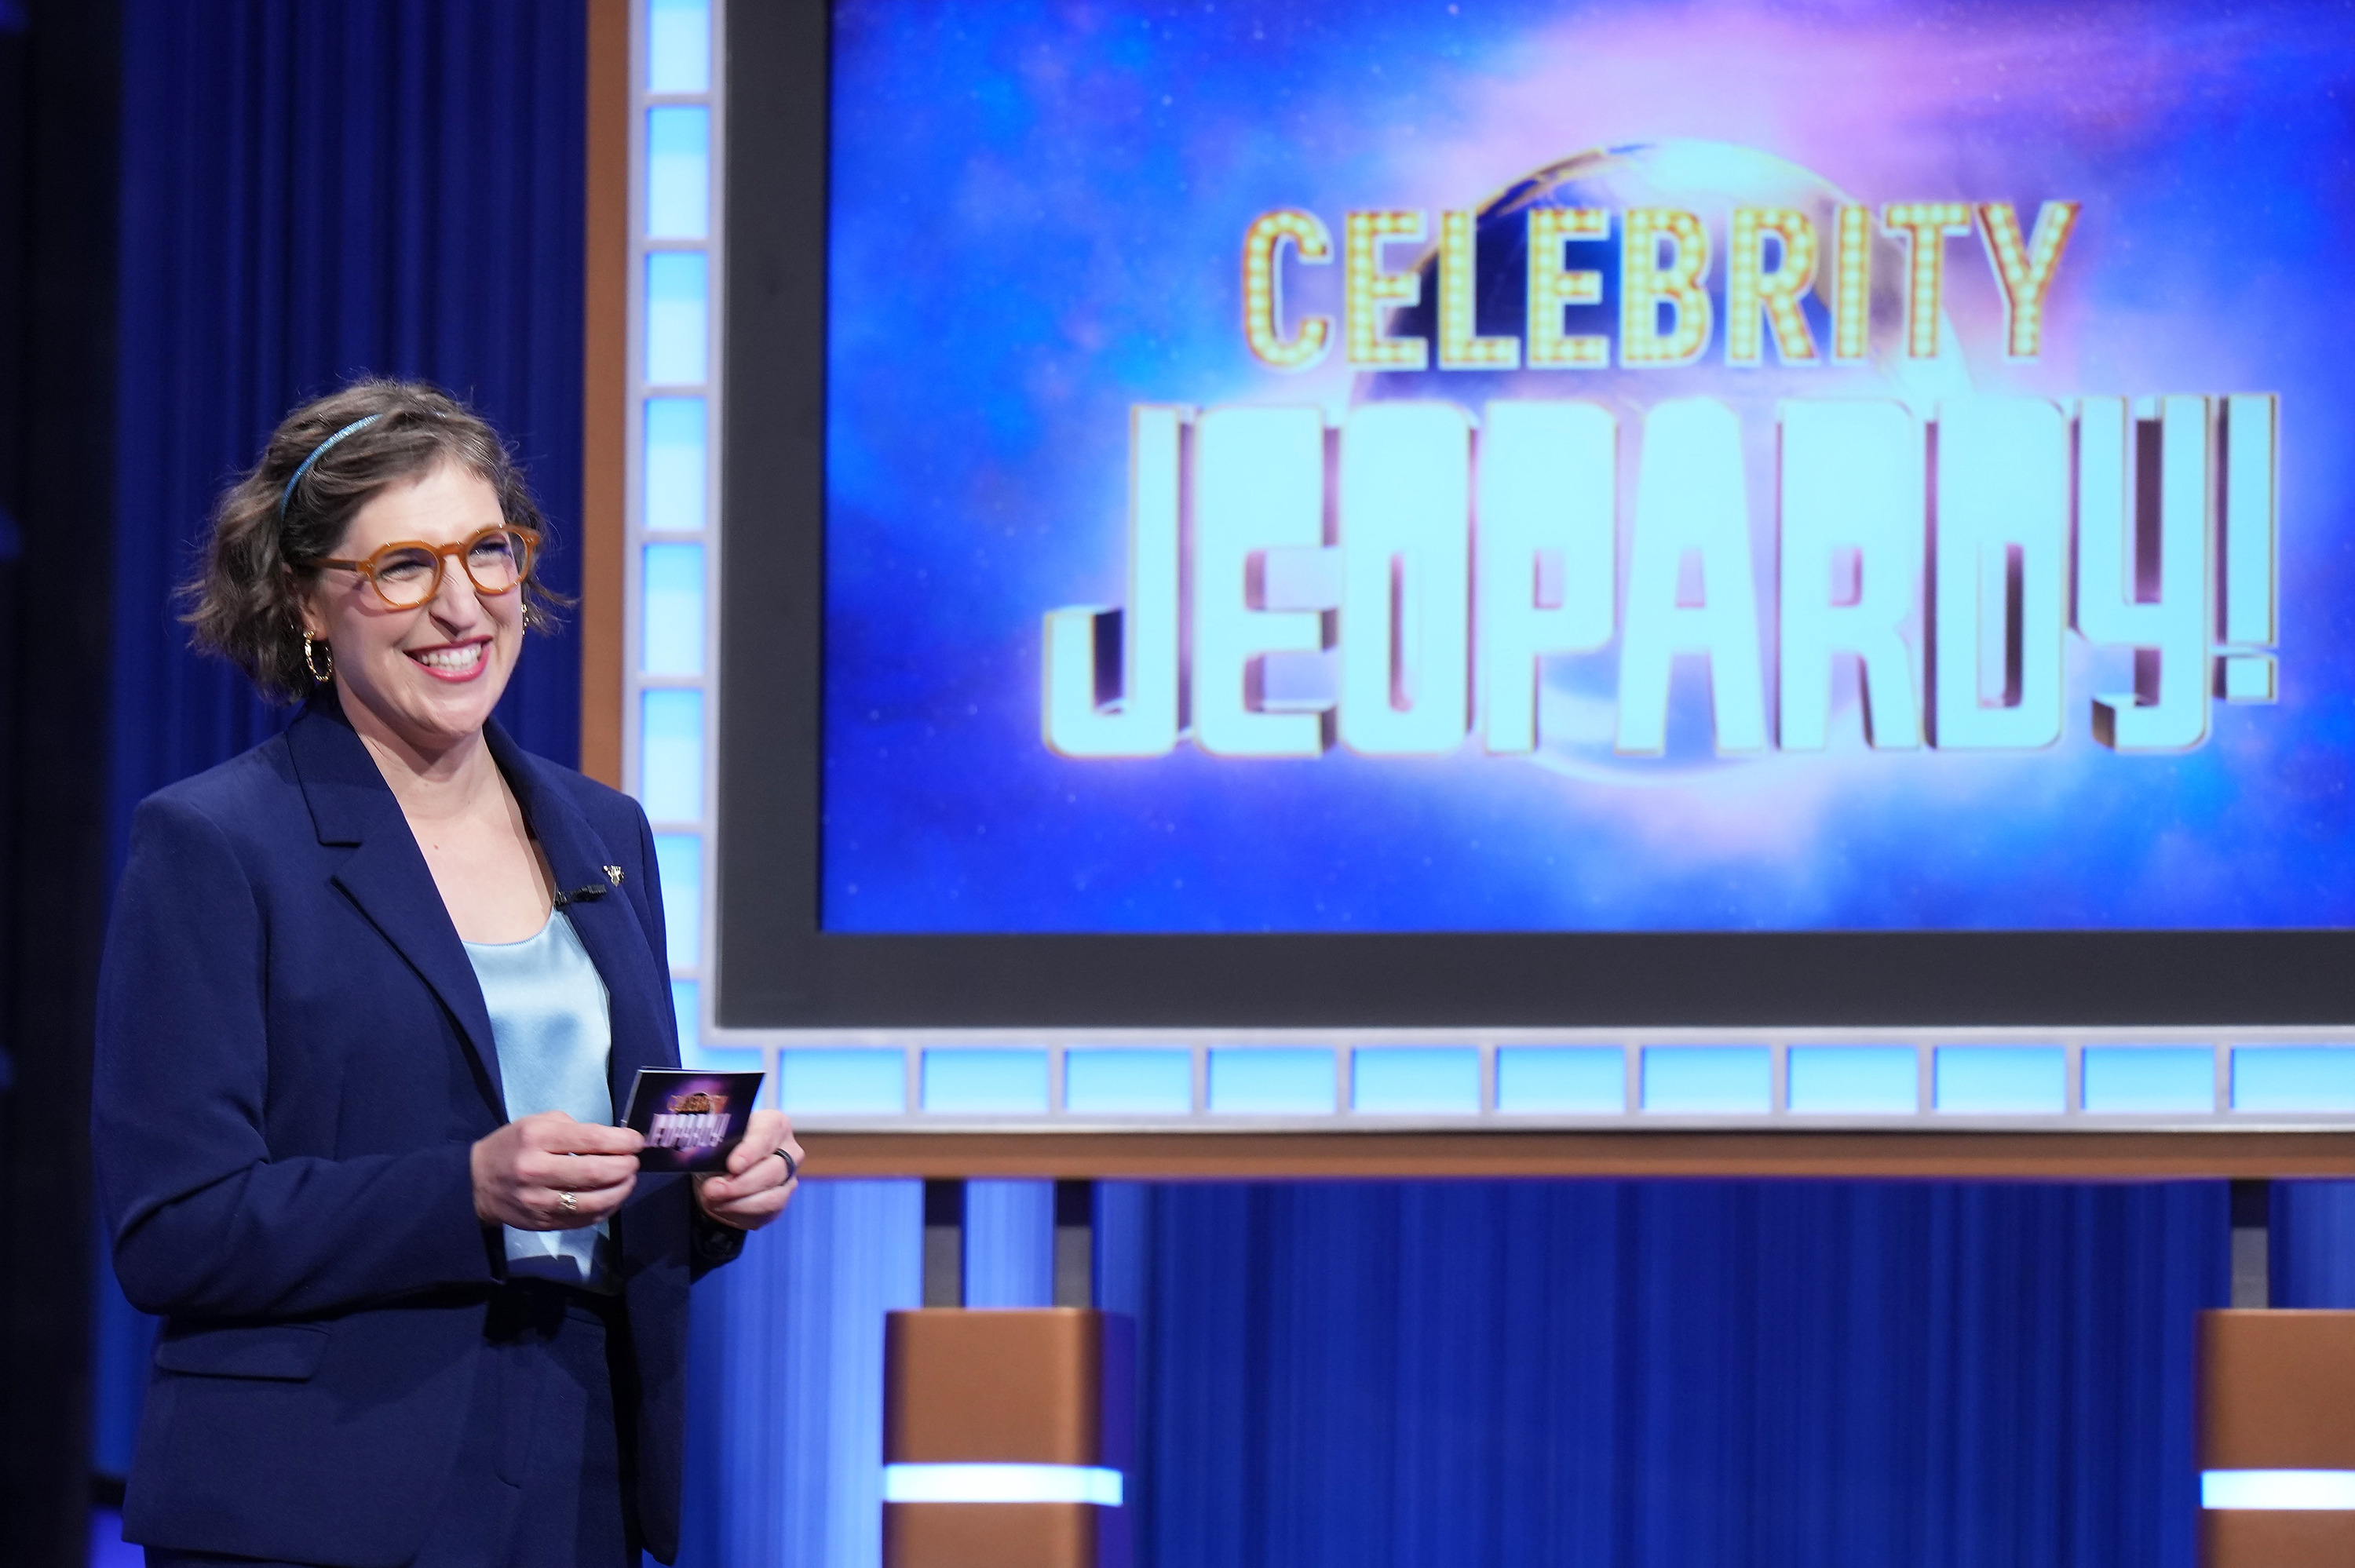 Mayim Bialik during an episode of "Celebrity Jeopardy!" | Source: Getty Images